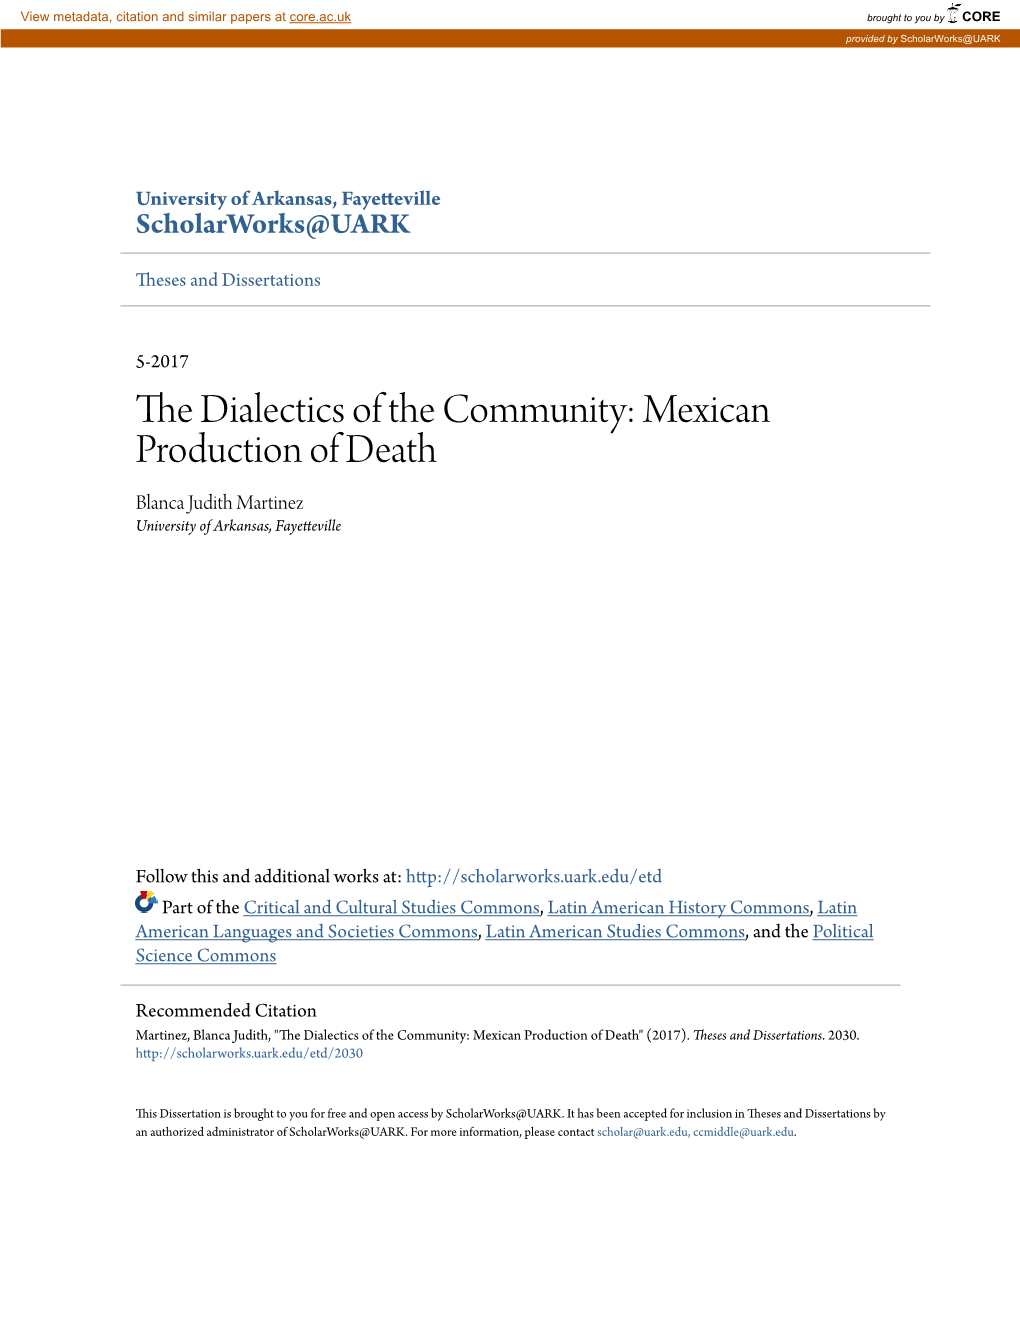 The Dialectics of the Community: Mexican Production of Death Blanca Judith Martinez University of Arkansas, Fayetteville